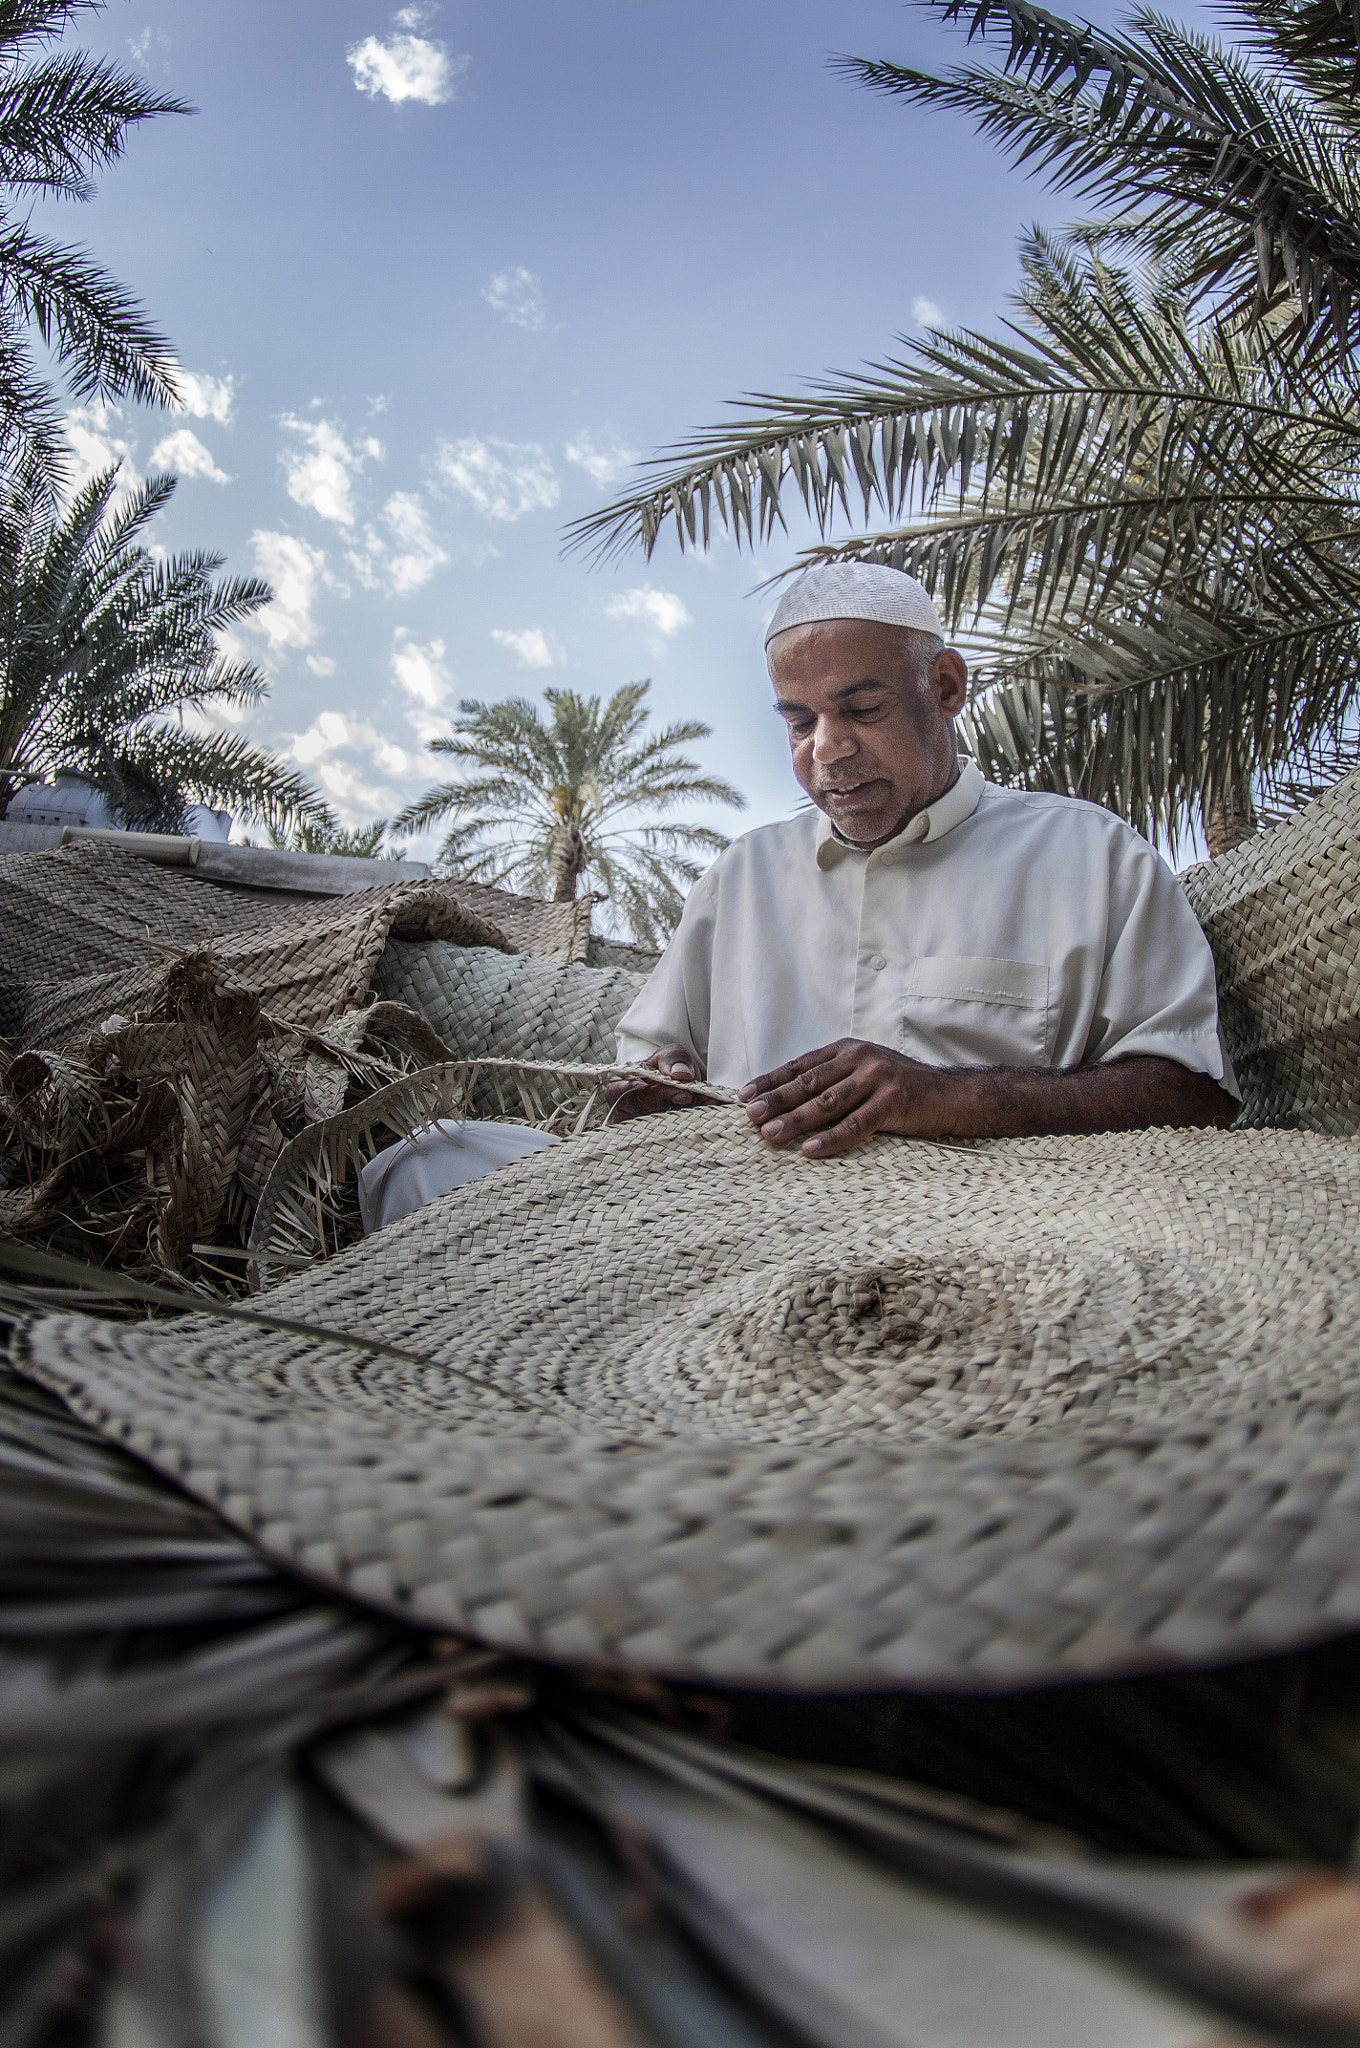 Canon EOS 5D Mark II + Tokina AT-X 10-17mm F3.5-4.5 DX Fisheye sample photo. Daily basis this man spend his time in working to make this shape with peace of palm. photography